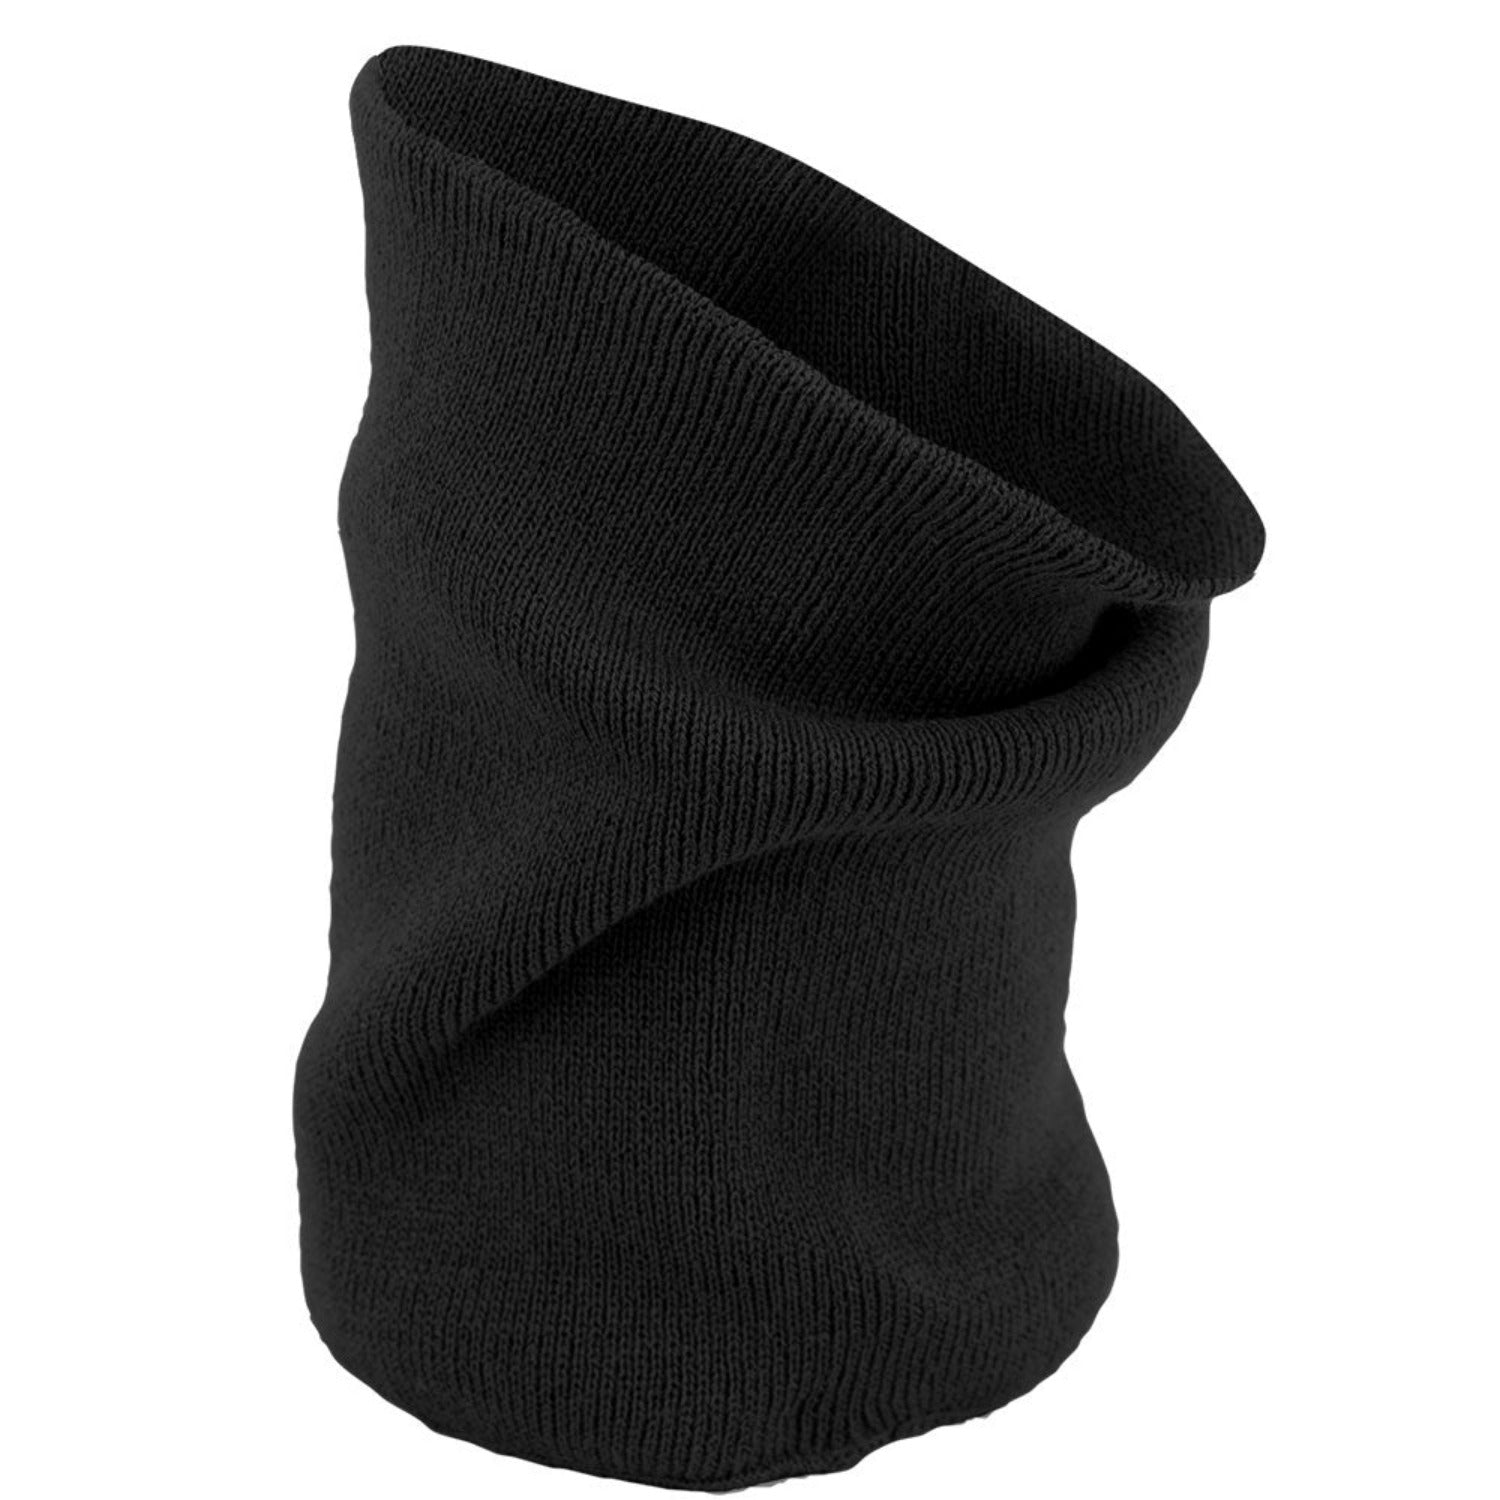 743 Acrylic Neck Warmer - Black full product perspective - made in The USA Wigwam Socks